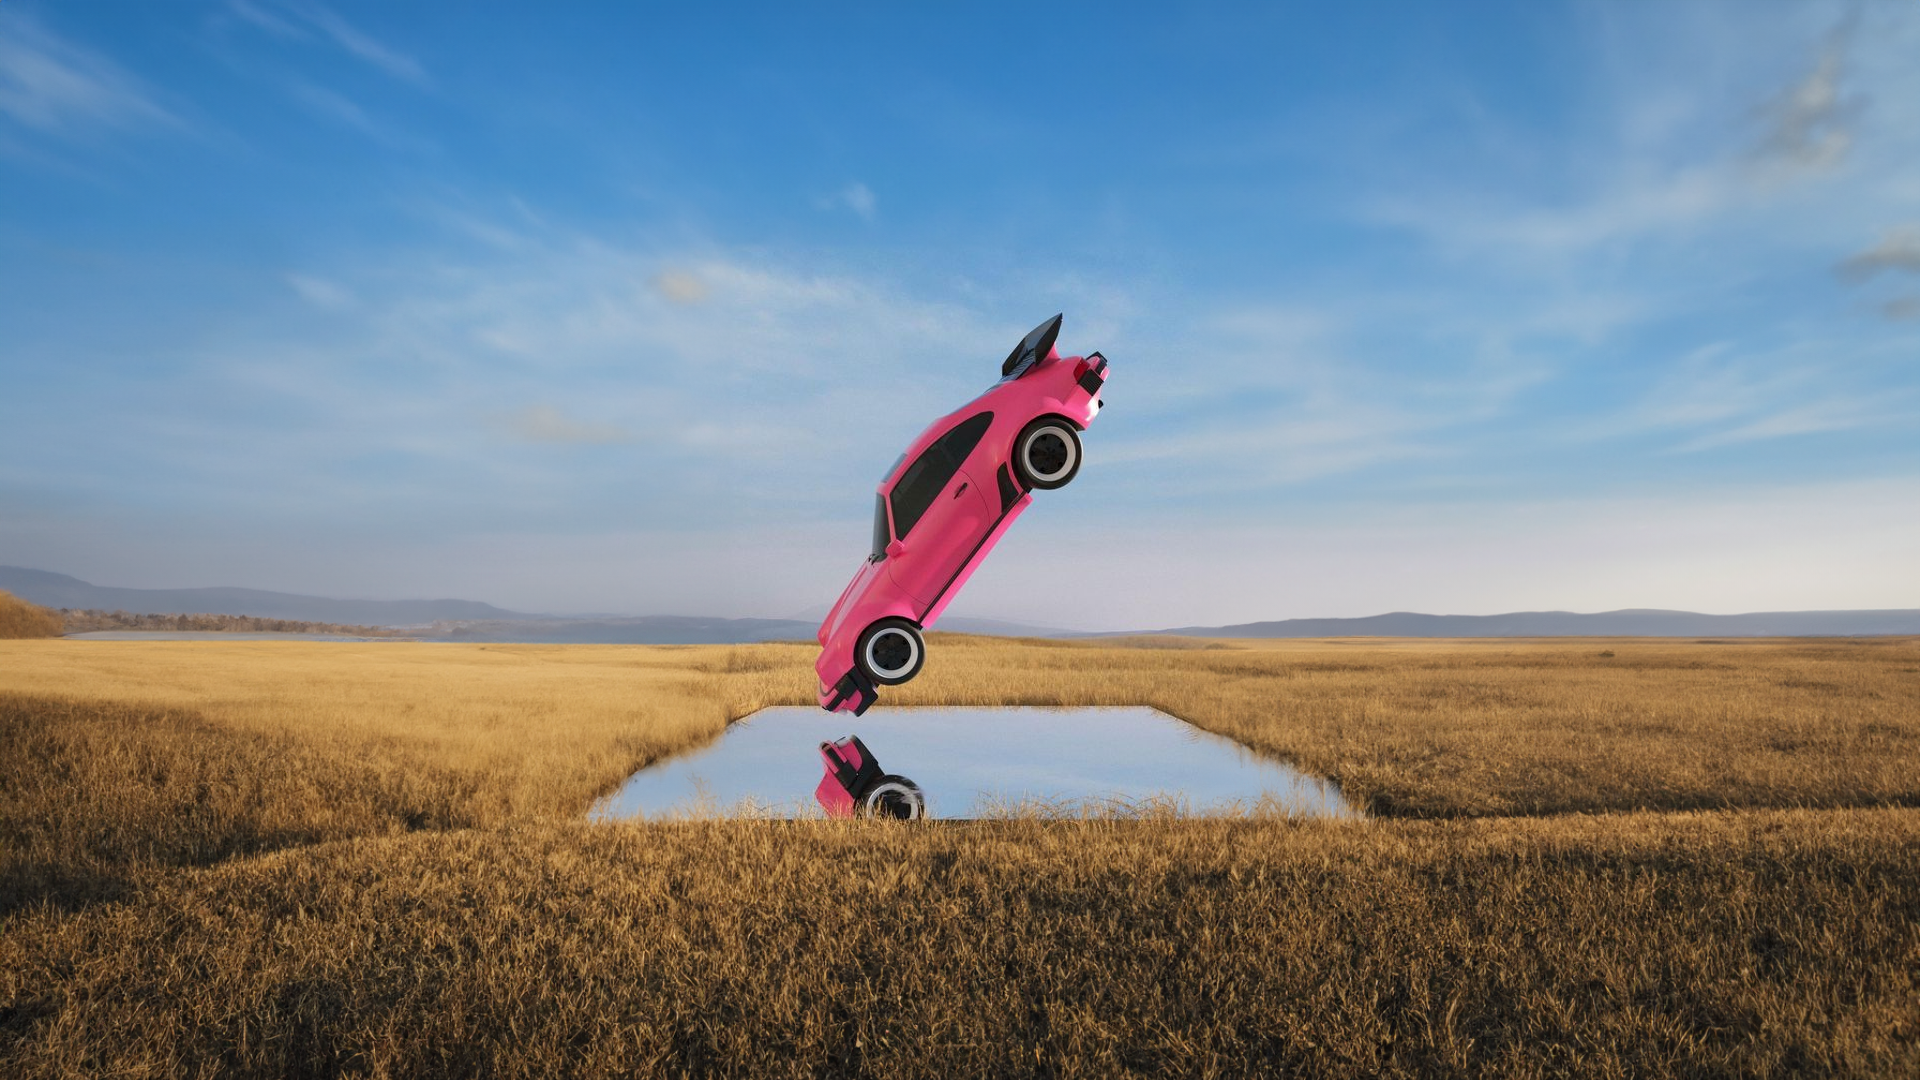 General 1920x1080 car ground water sky clouds reflection grass